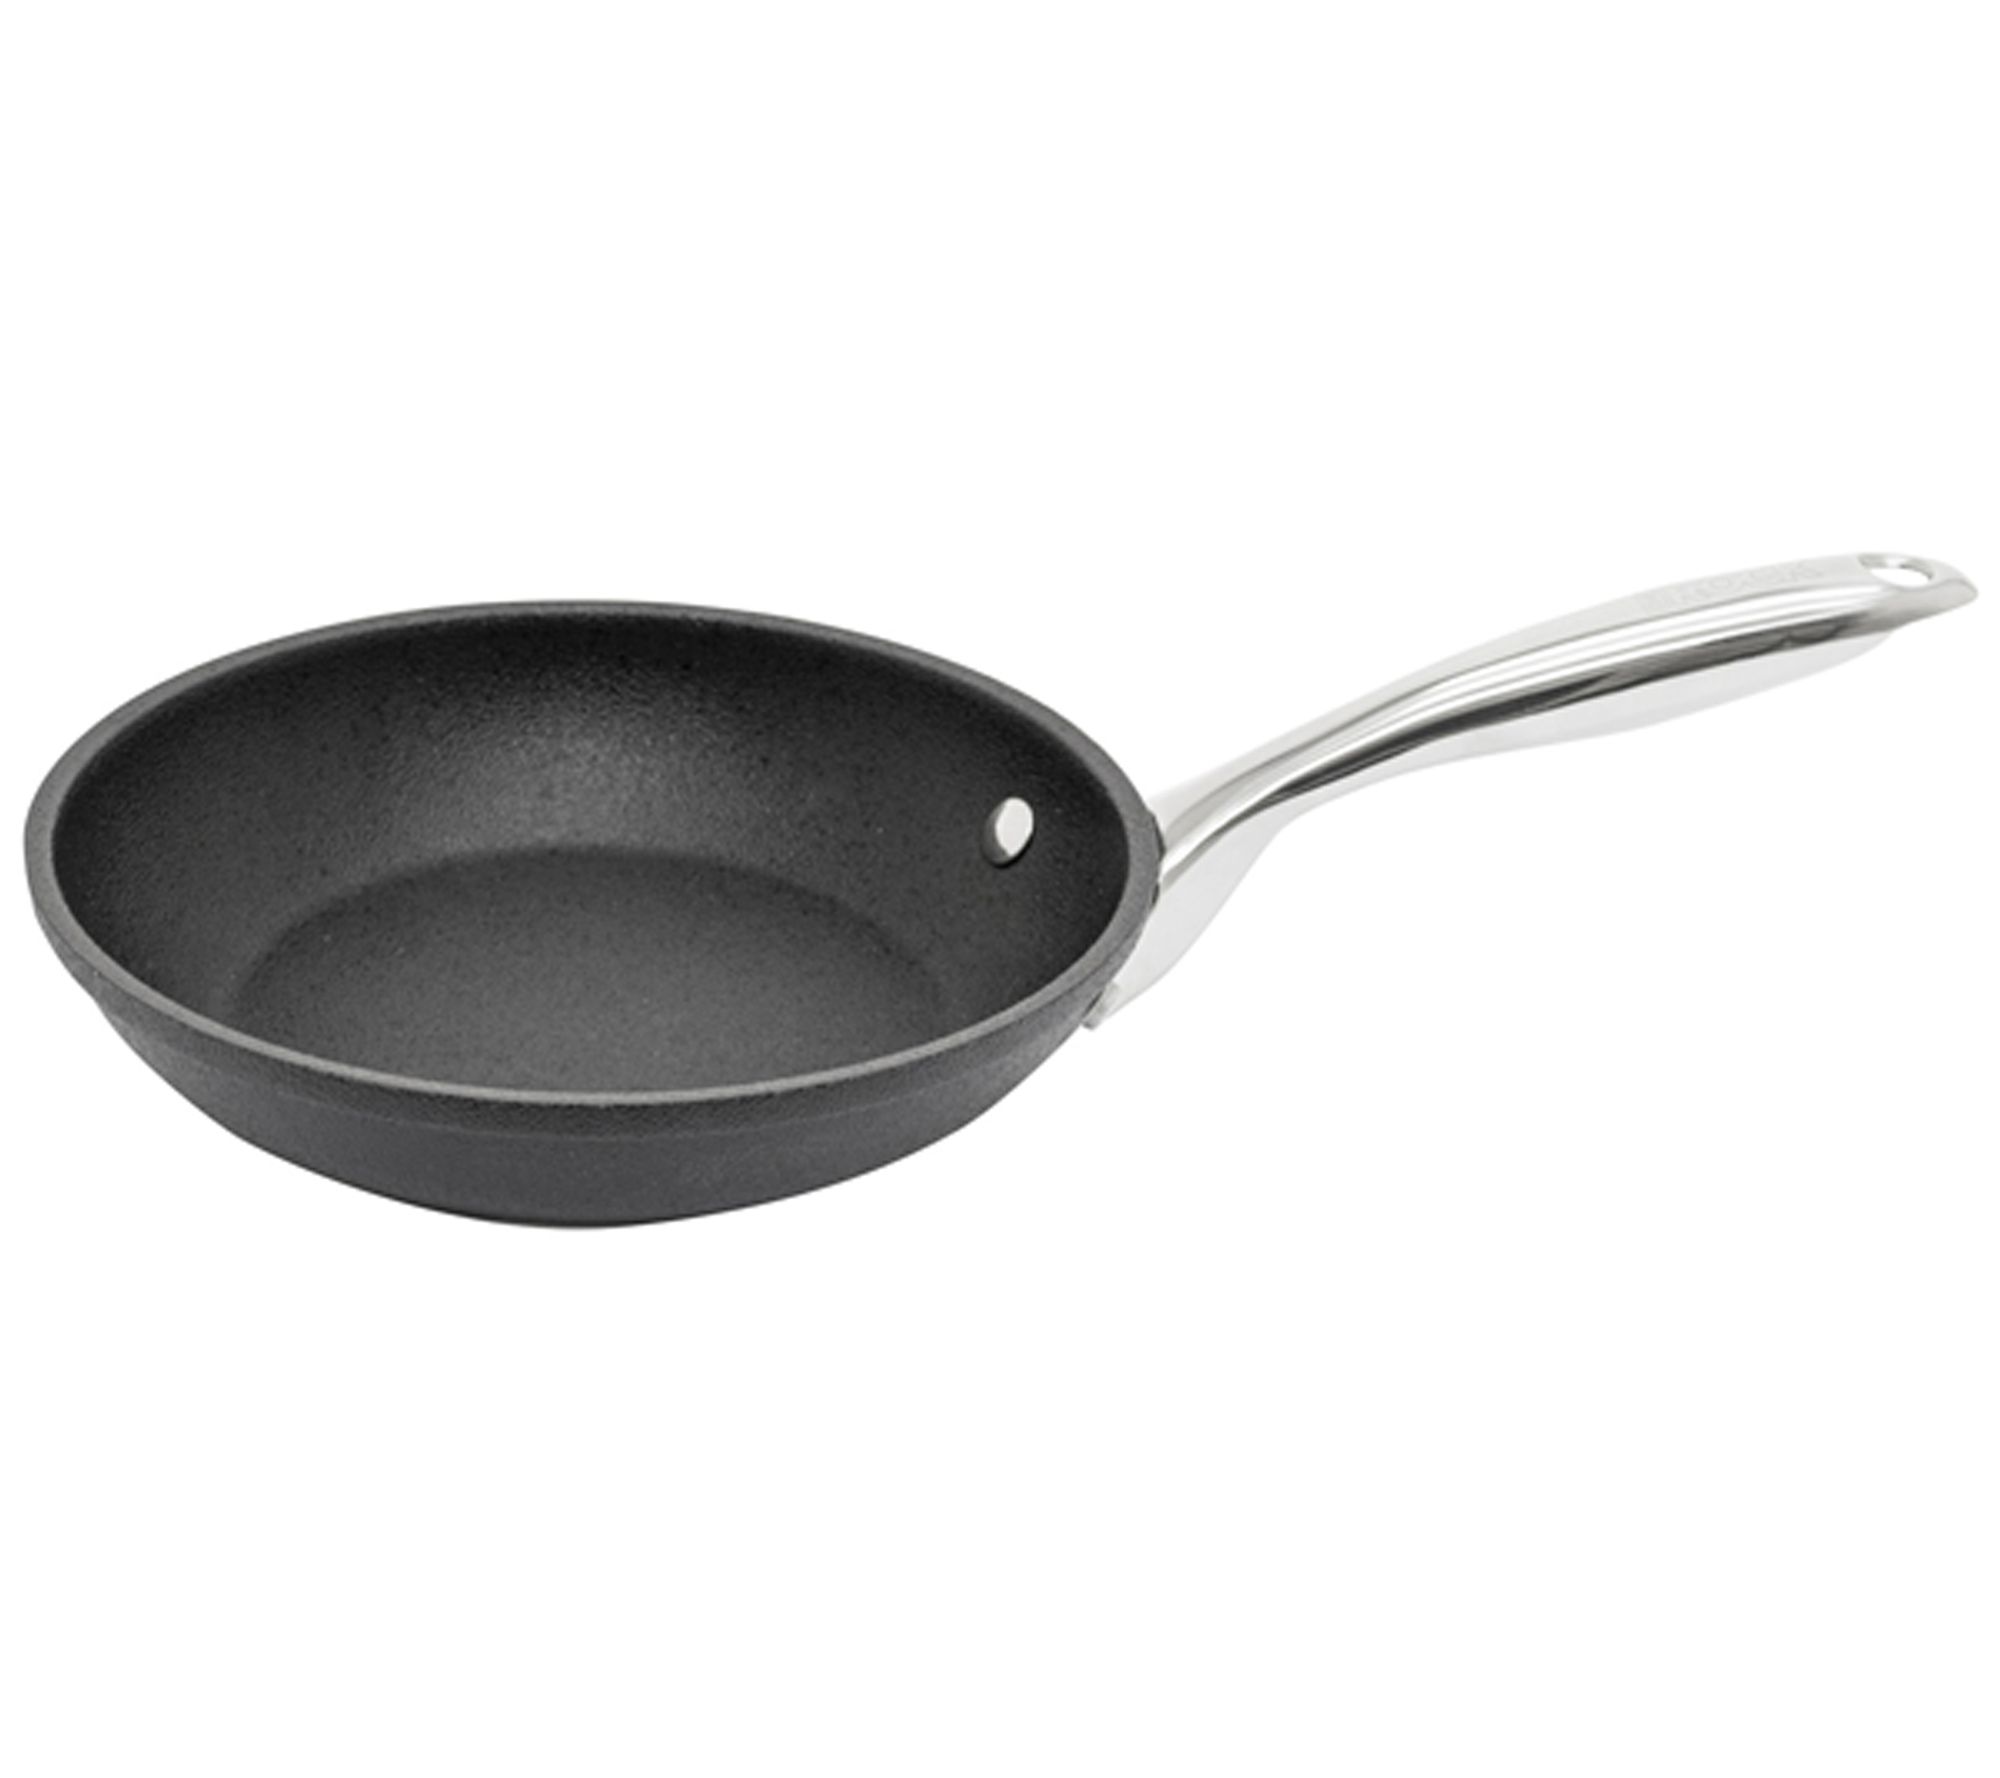 Oster Stonefire 16-Inch Carbon Steel Nonstick P aella Pan 